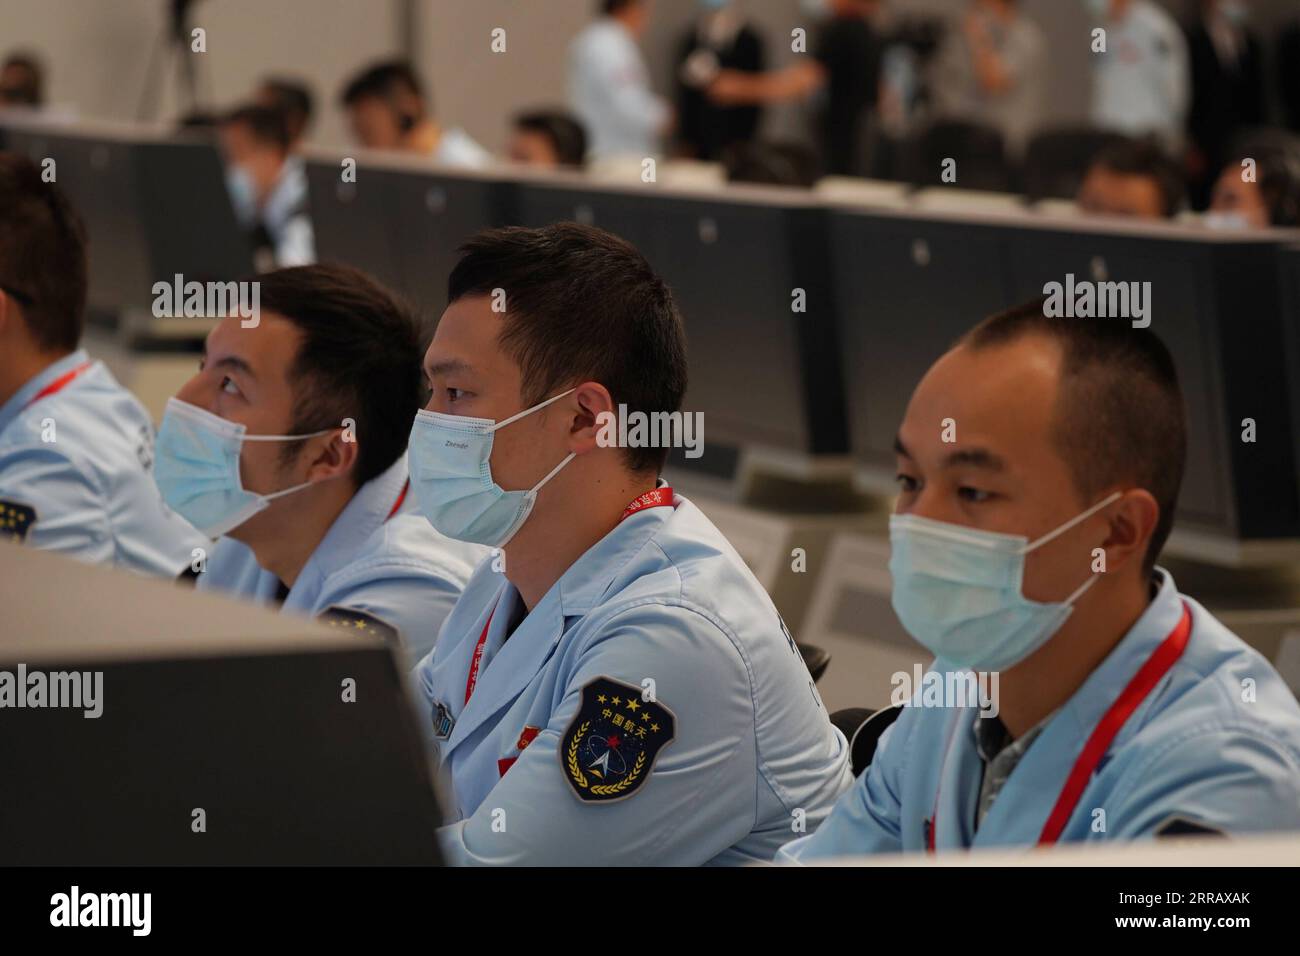 210820 -- BEIJING, Aug. 20, 2021 -- Technical personnel work at Beijing Aerospace Control Center in Beijing, capital of China, Aug. 20, 2021. TO GO WITH China Focus: Chinese astronauts complete second time EVAs for space station construction  EyesonSci CHINA-SHENZHOU-12-ASTRONAUTS-EXTRAVEHICULAR ACTIVITIES-SECOND TIME-COMPLETION CN TianxDingyu PUBLICATIONxNOTxINxCHN Stock Photo